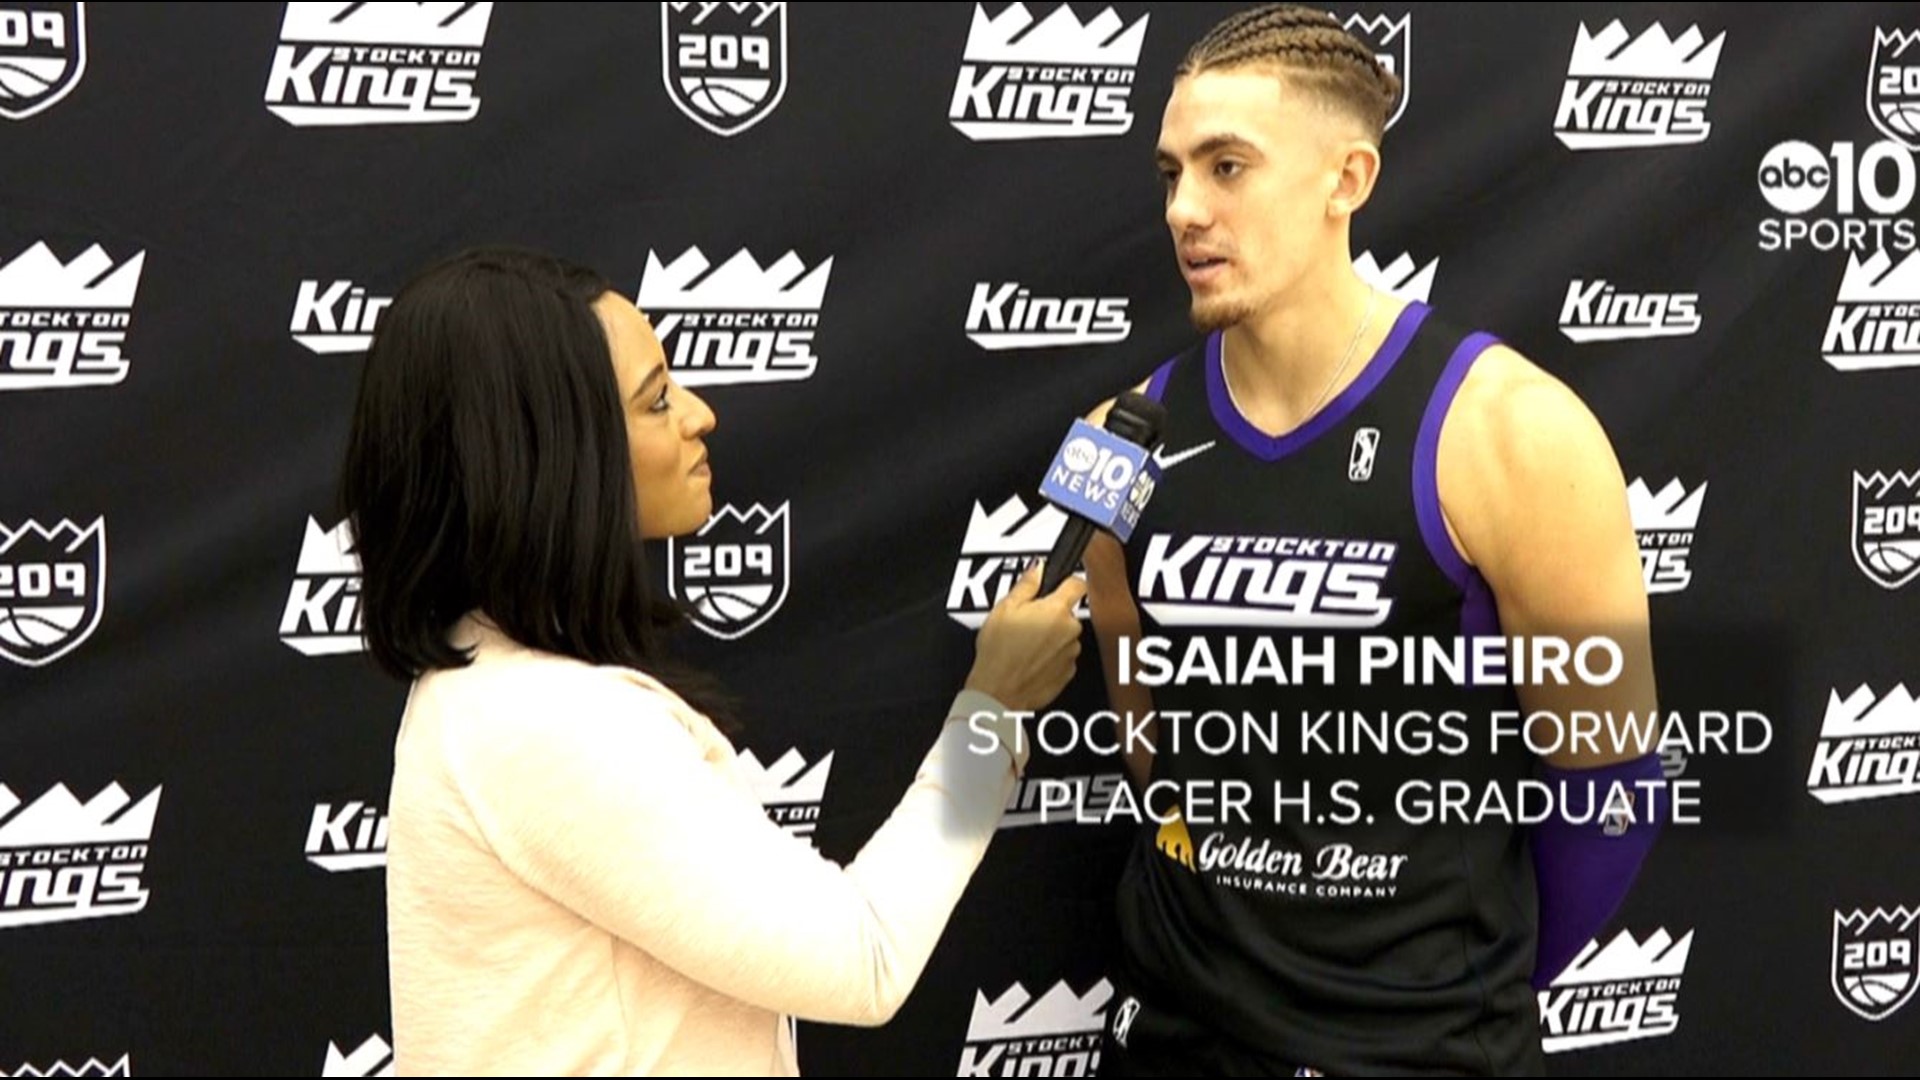 ABC10's Lina Washington goes 1-on-1 with Auburn native Isaiah Pineiro who continues training camp with the Stockton Kings with hopes of an NBA Call-Up in Sacramento